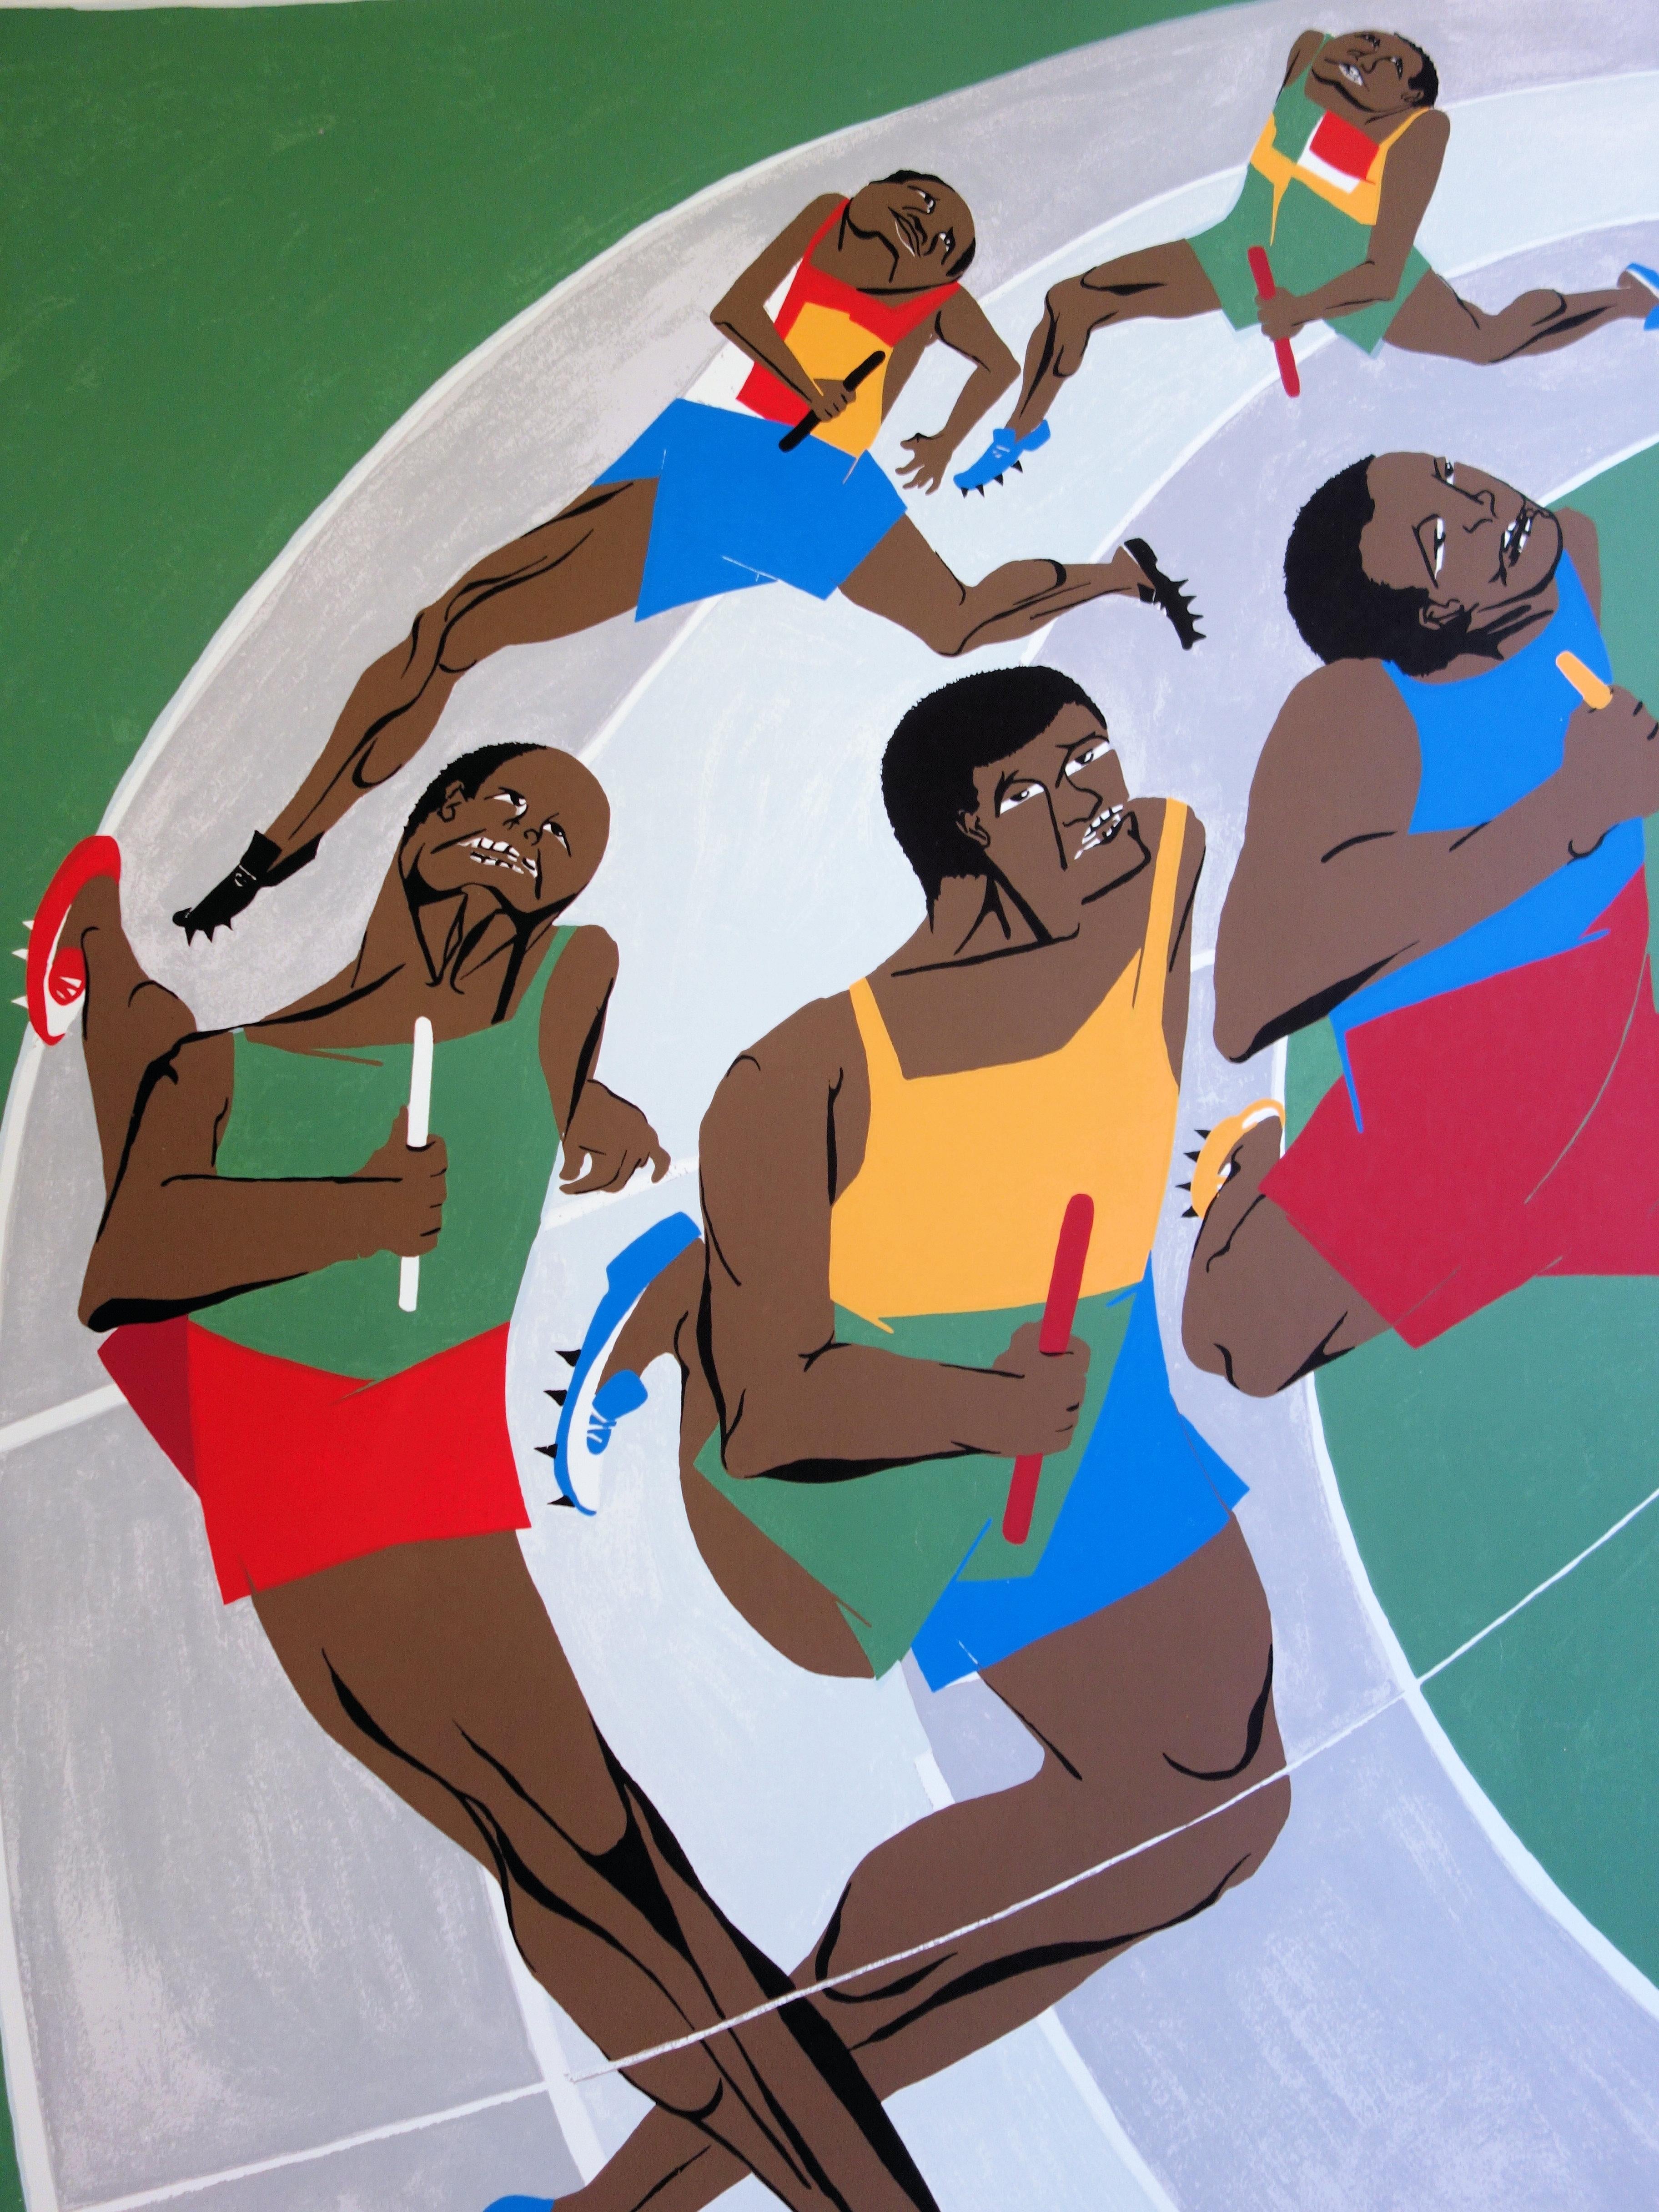 The Relay Race : Passing the Baton - Lithograph (Olympic Games Munich 1972) - Gray Abstract Print by Jacob Lawrence